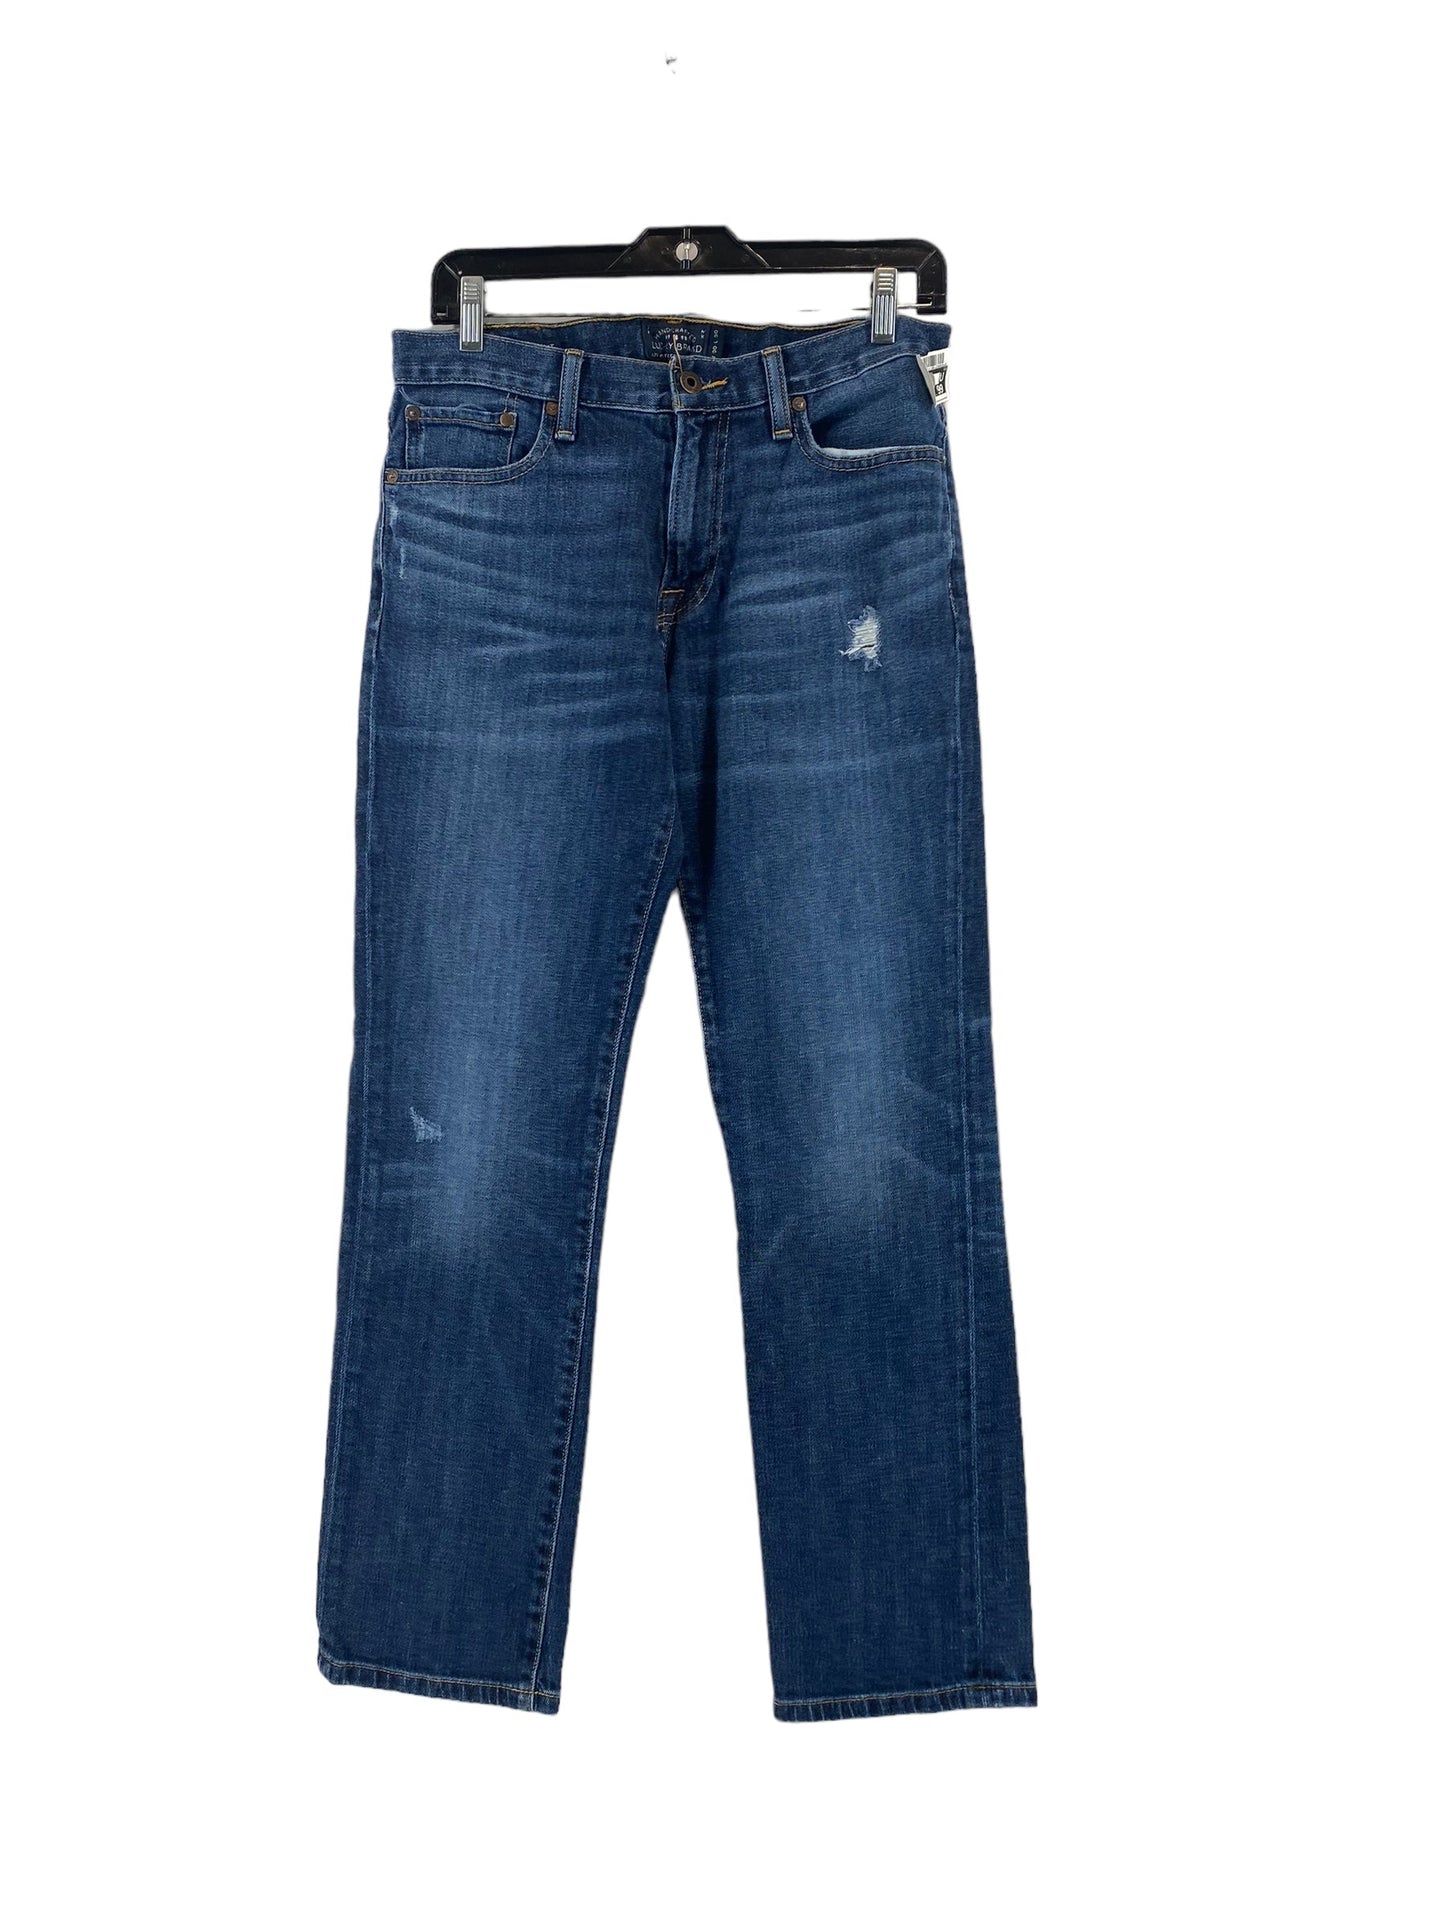 Jeans Straight By Lucky Brand  Size: 30